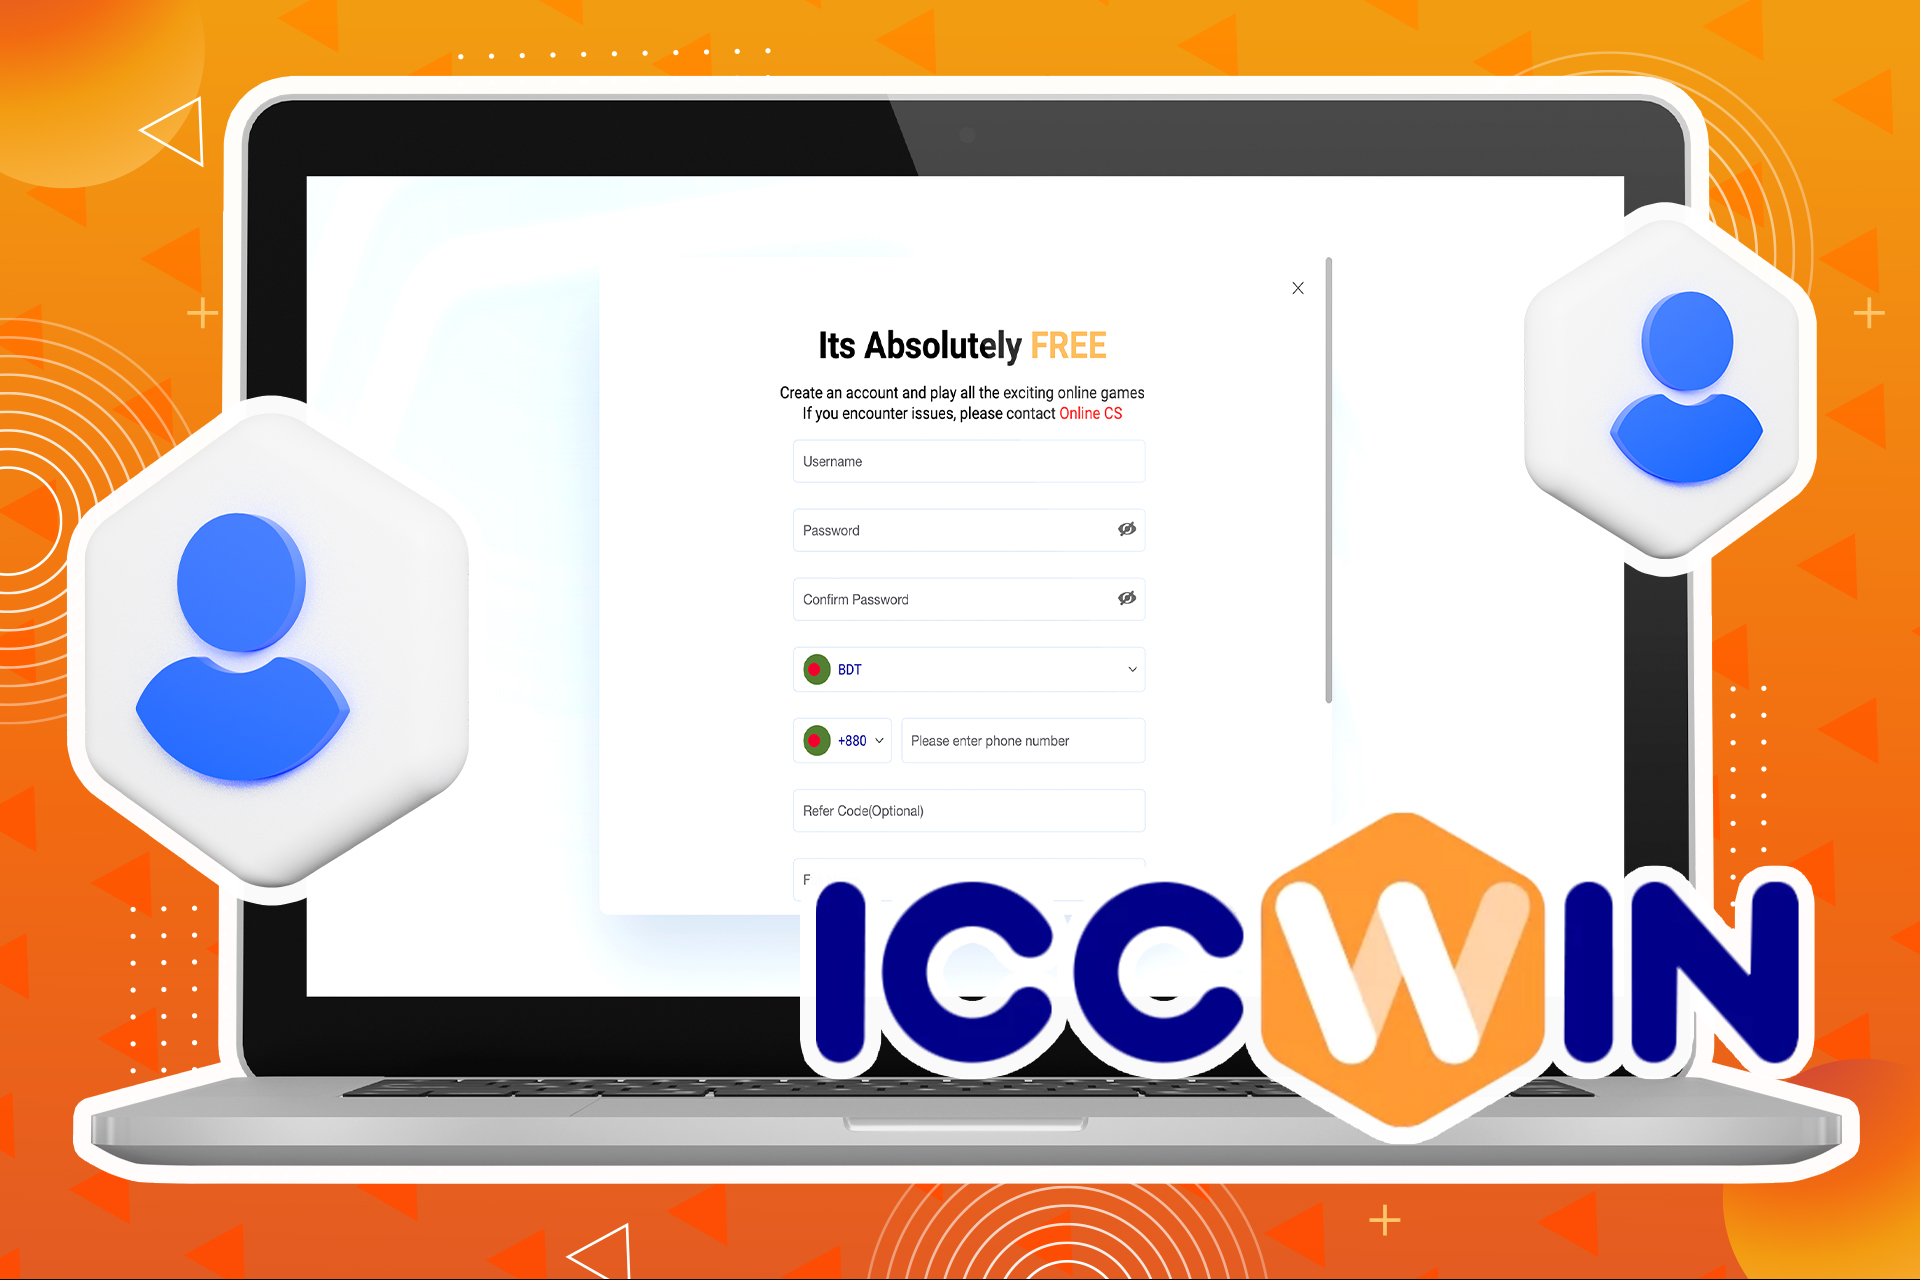 Go to the ICCWIN official website and sign up.